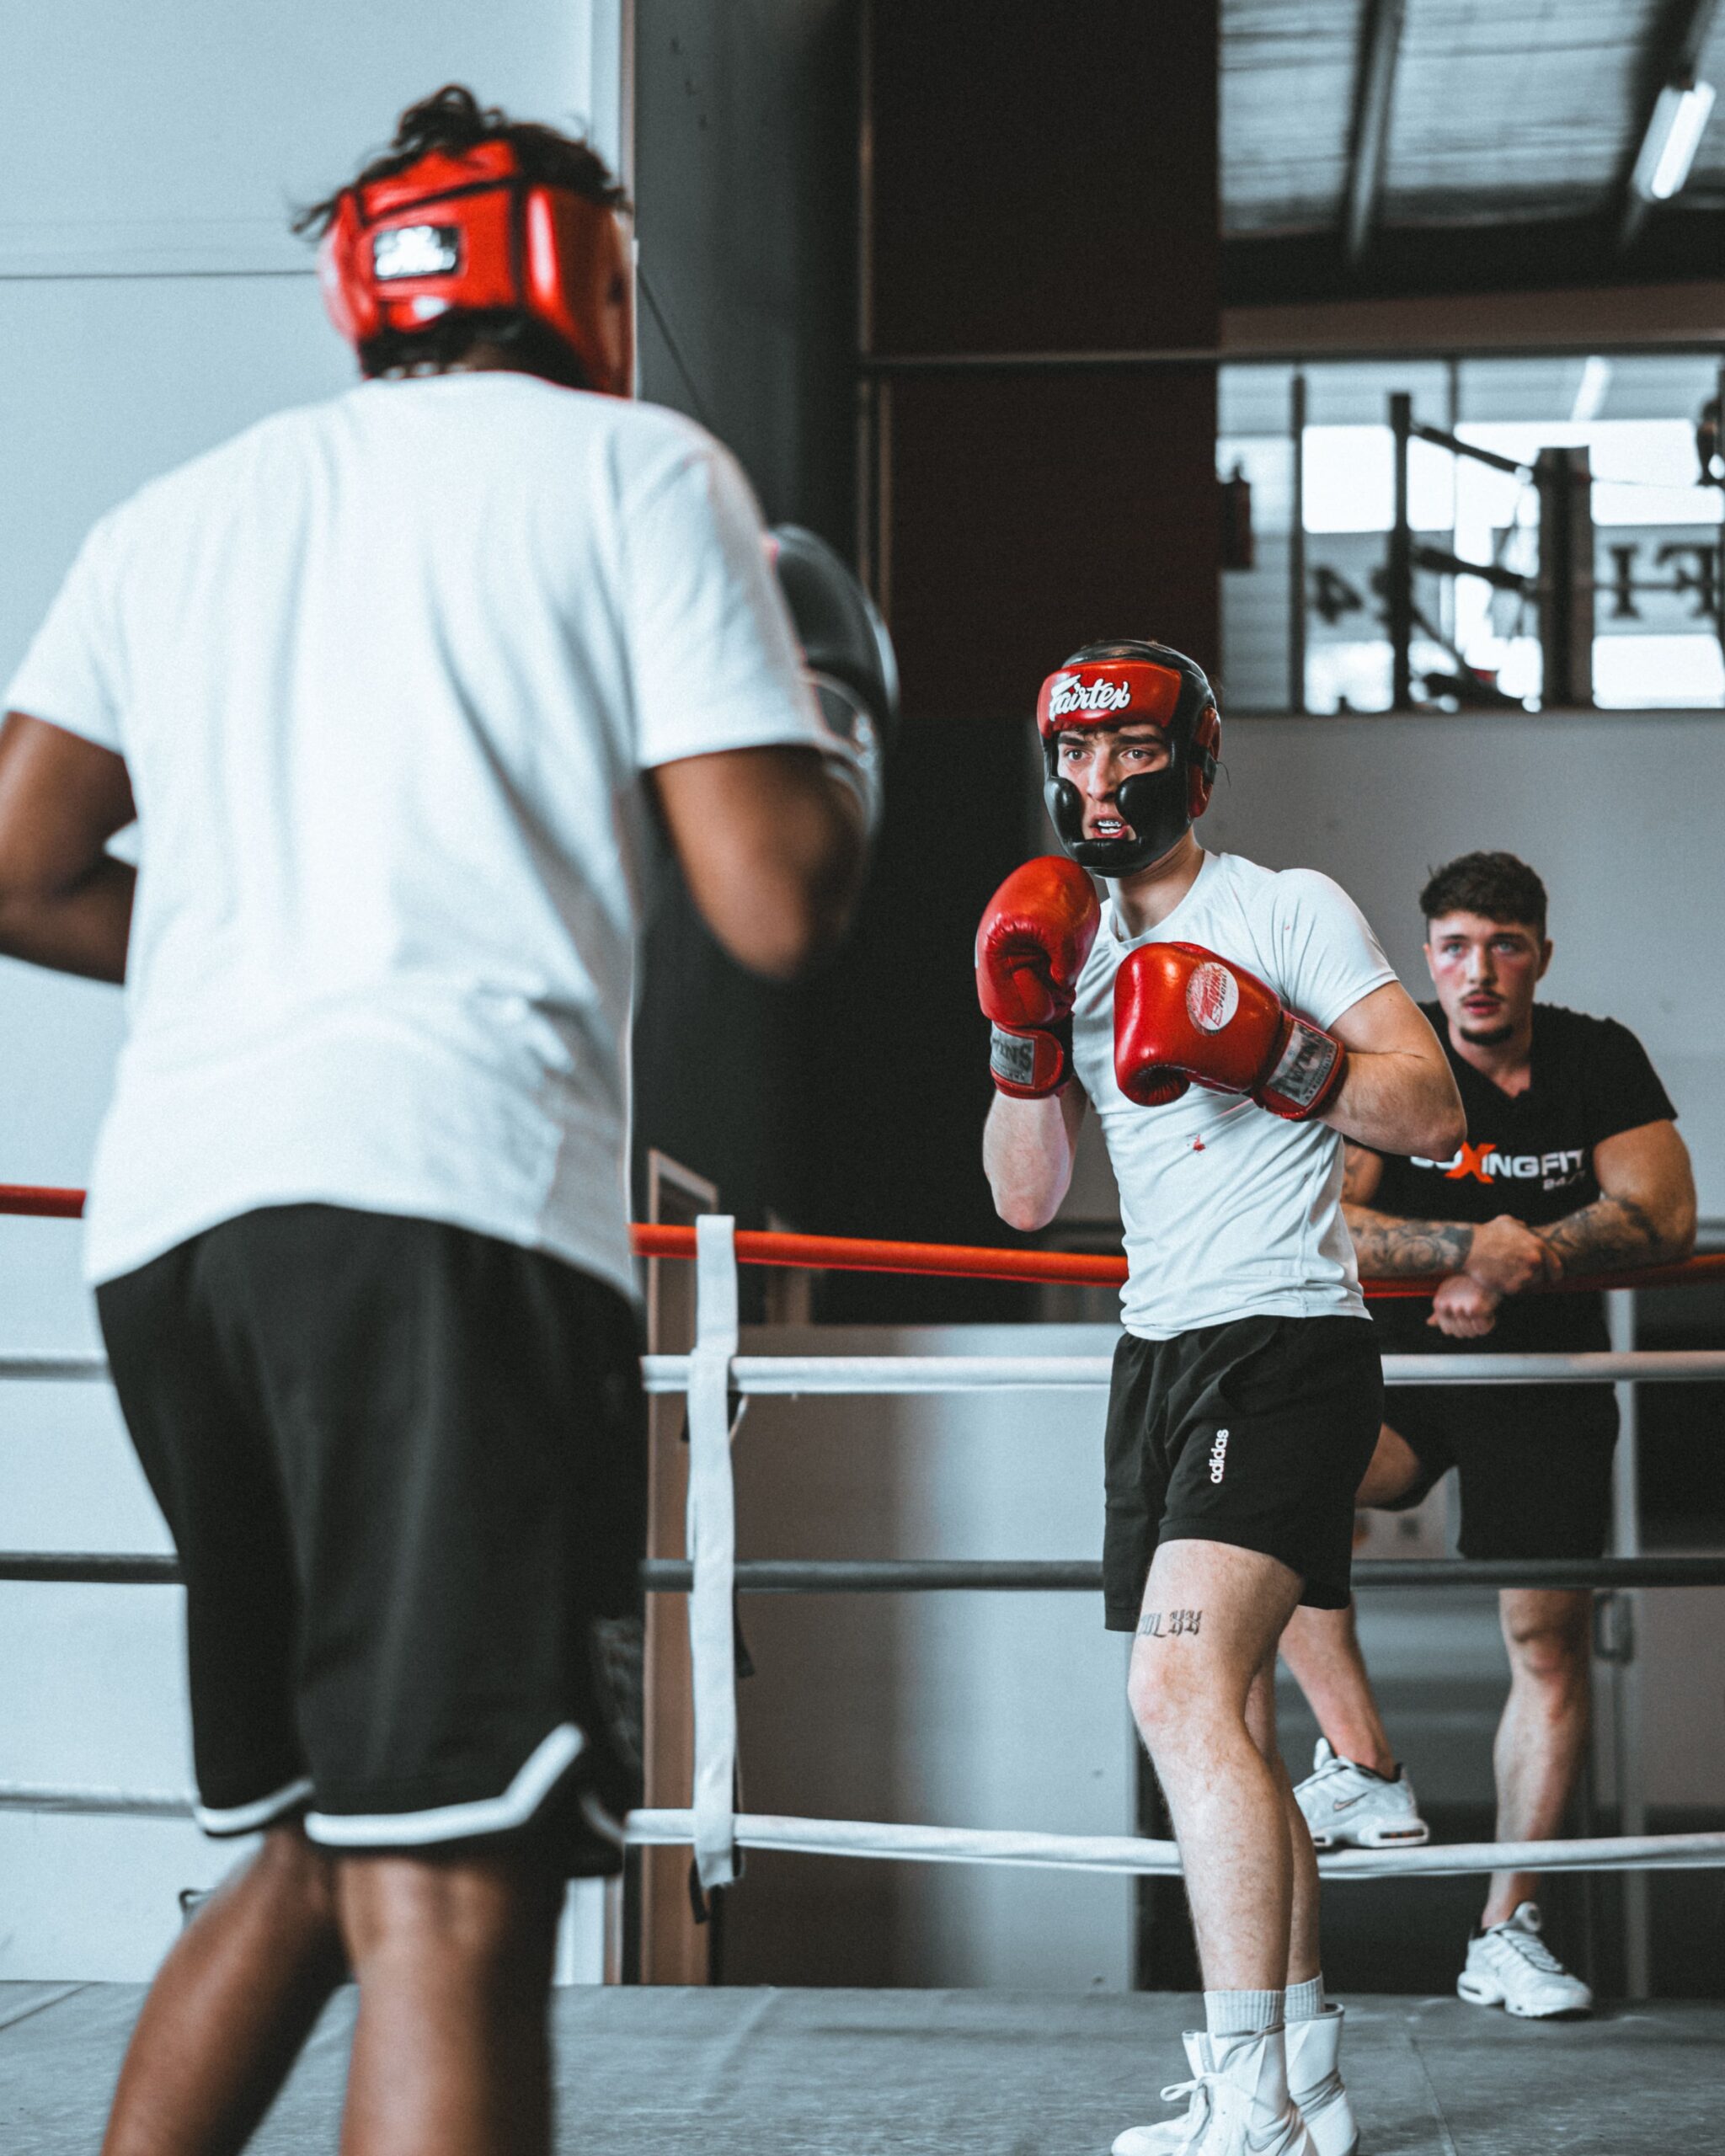 Beginners Boxing Trial at BoxingFit Port Melbourne